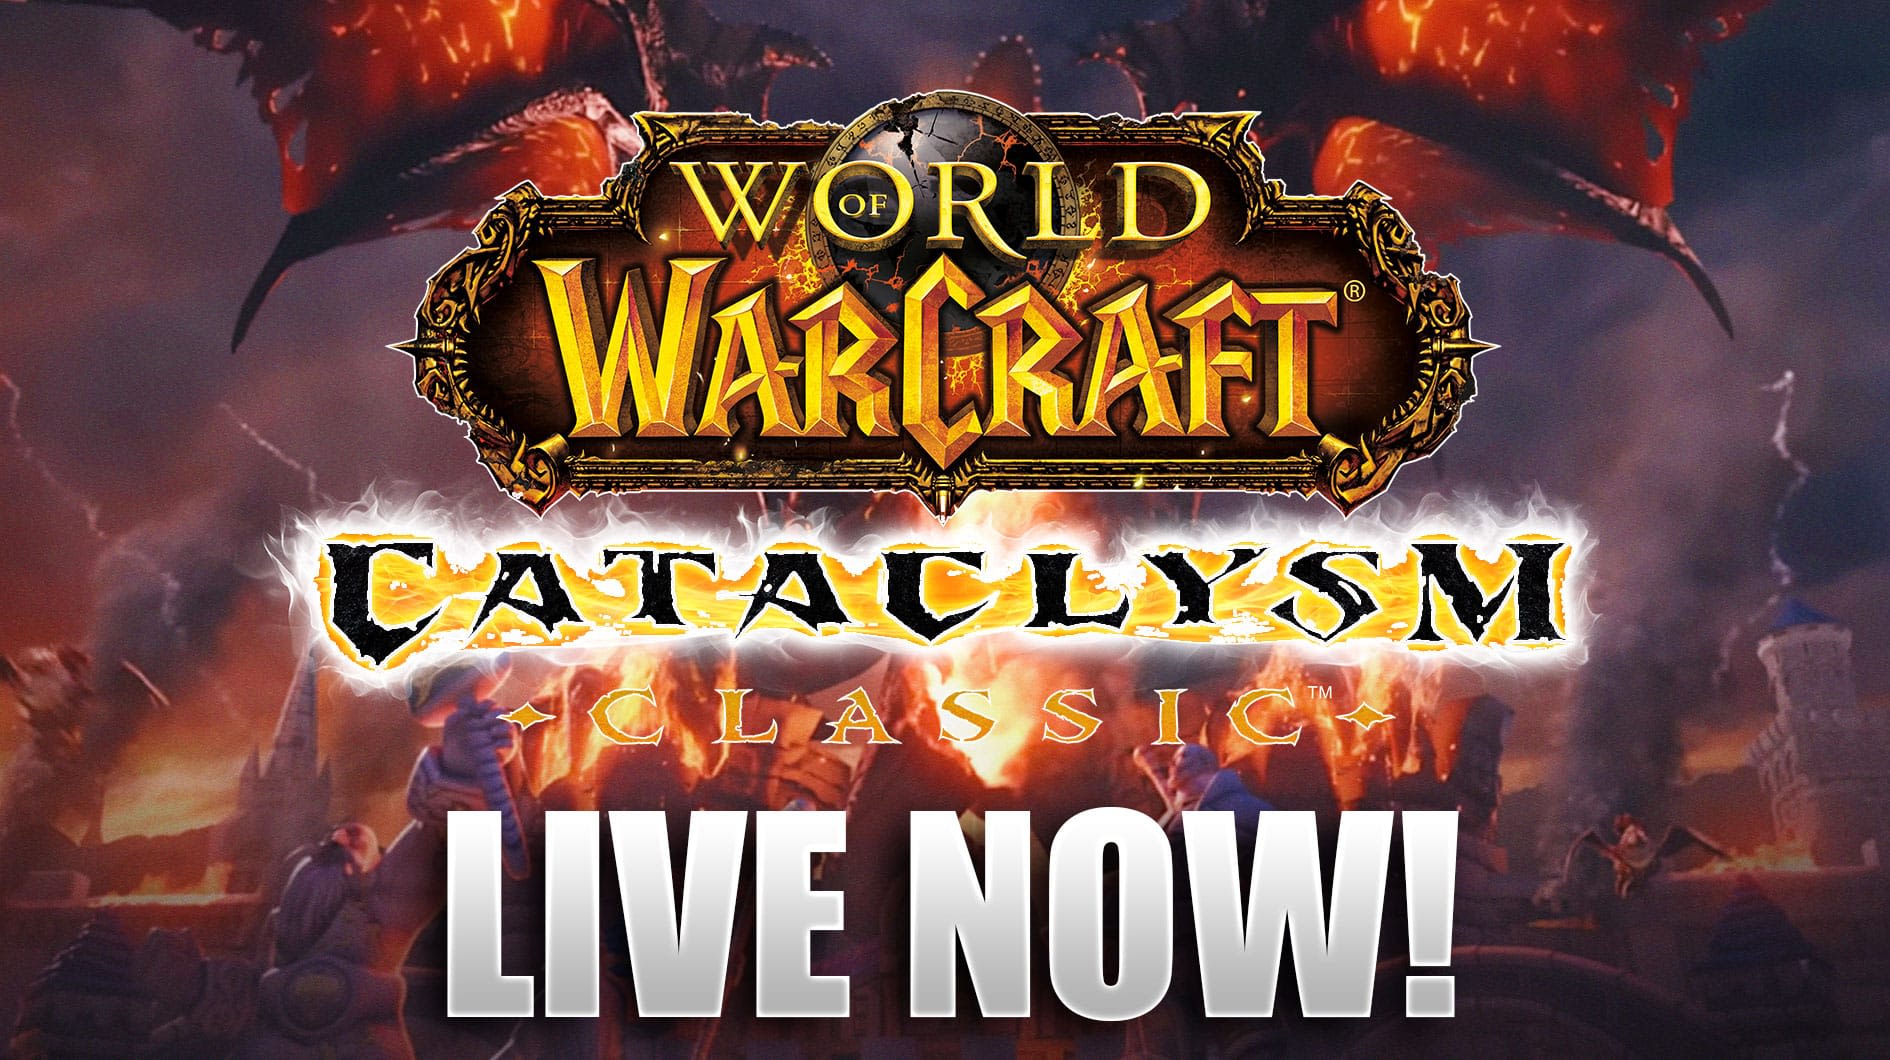 World of Warcraft - Cataclysm Classic Release Date, Gameplay